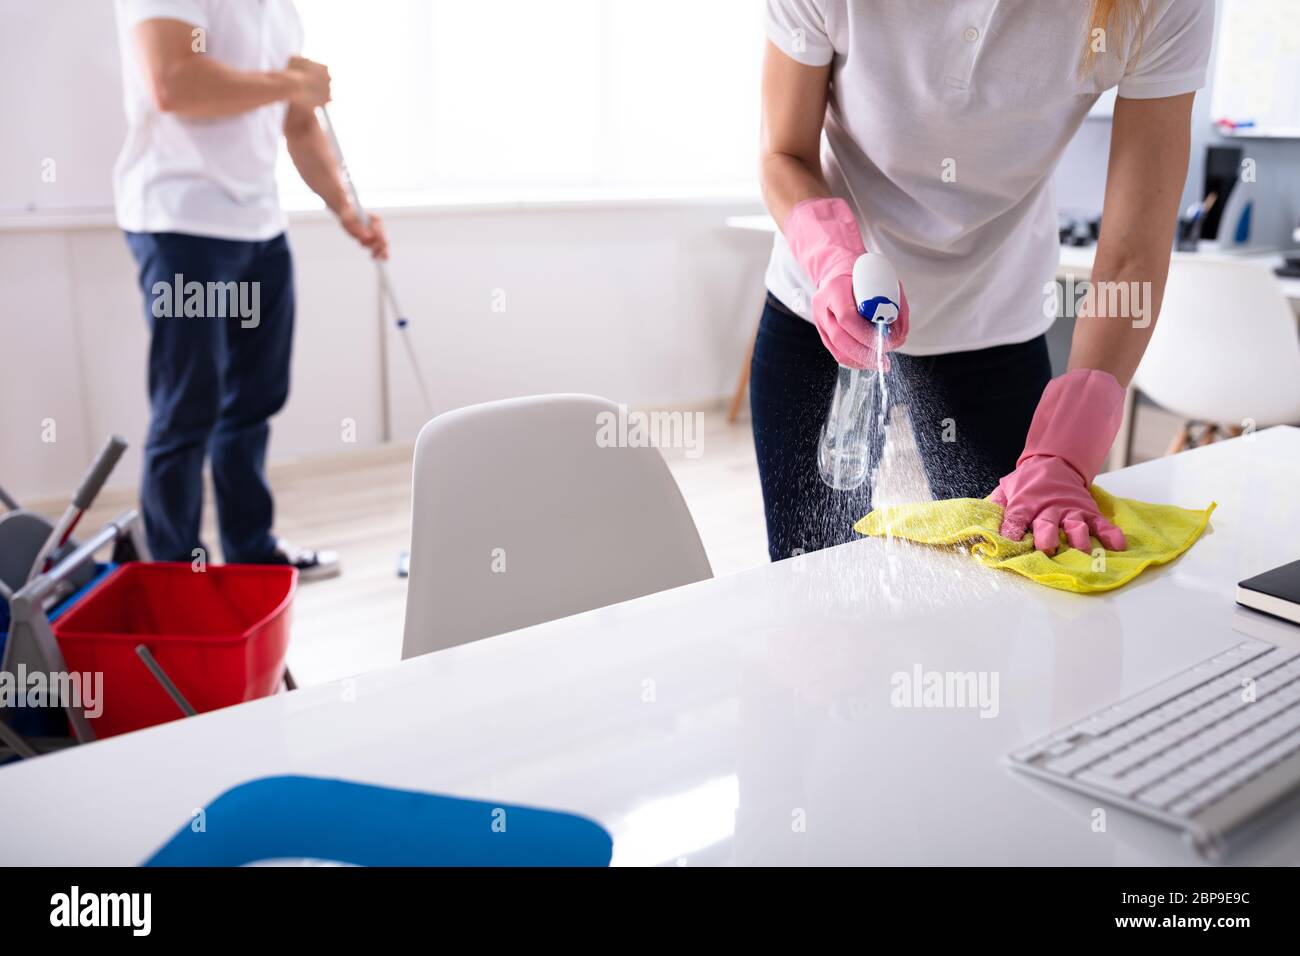 Two Janitor Cleaning The Desk And Mopping Floor In The Office Stock Photo